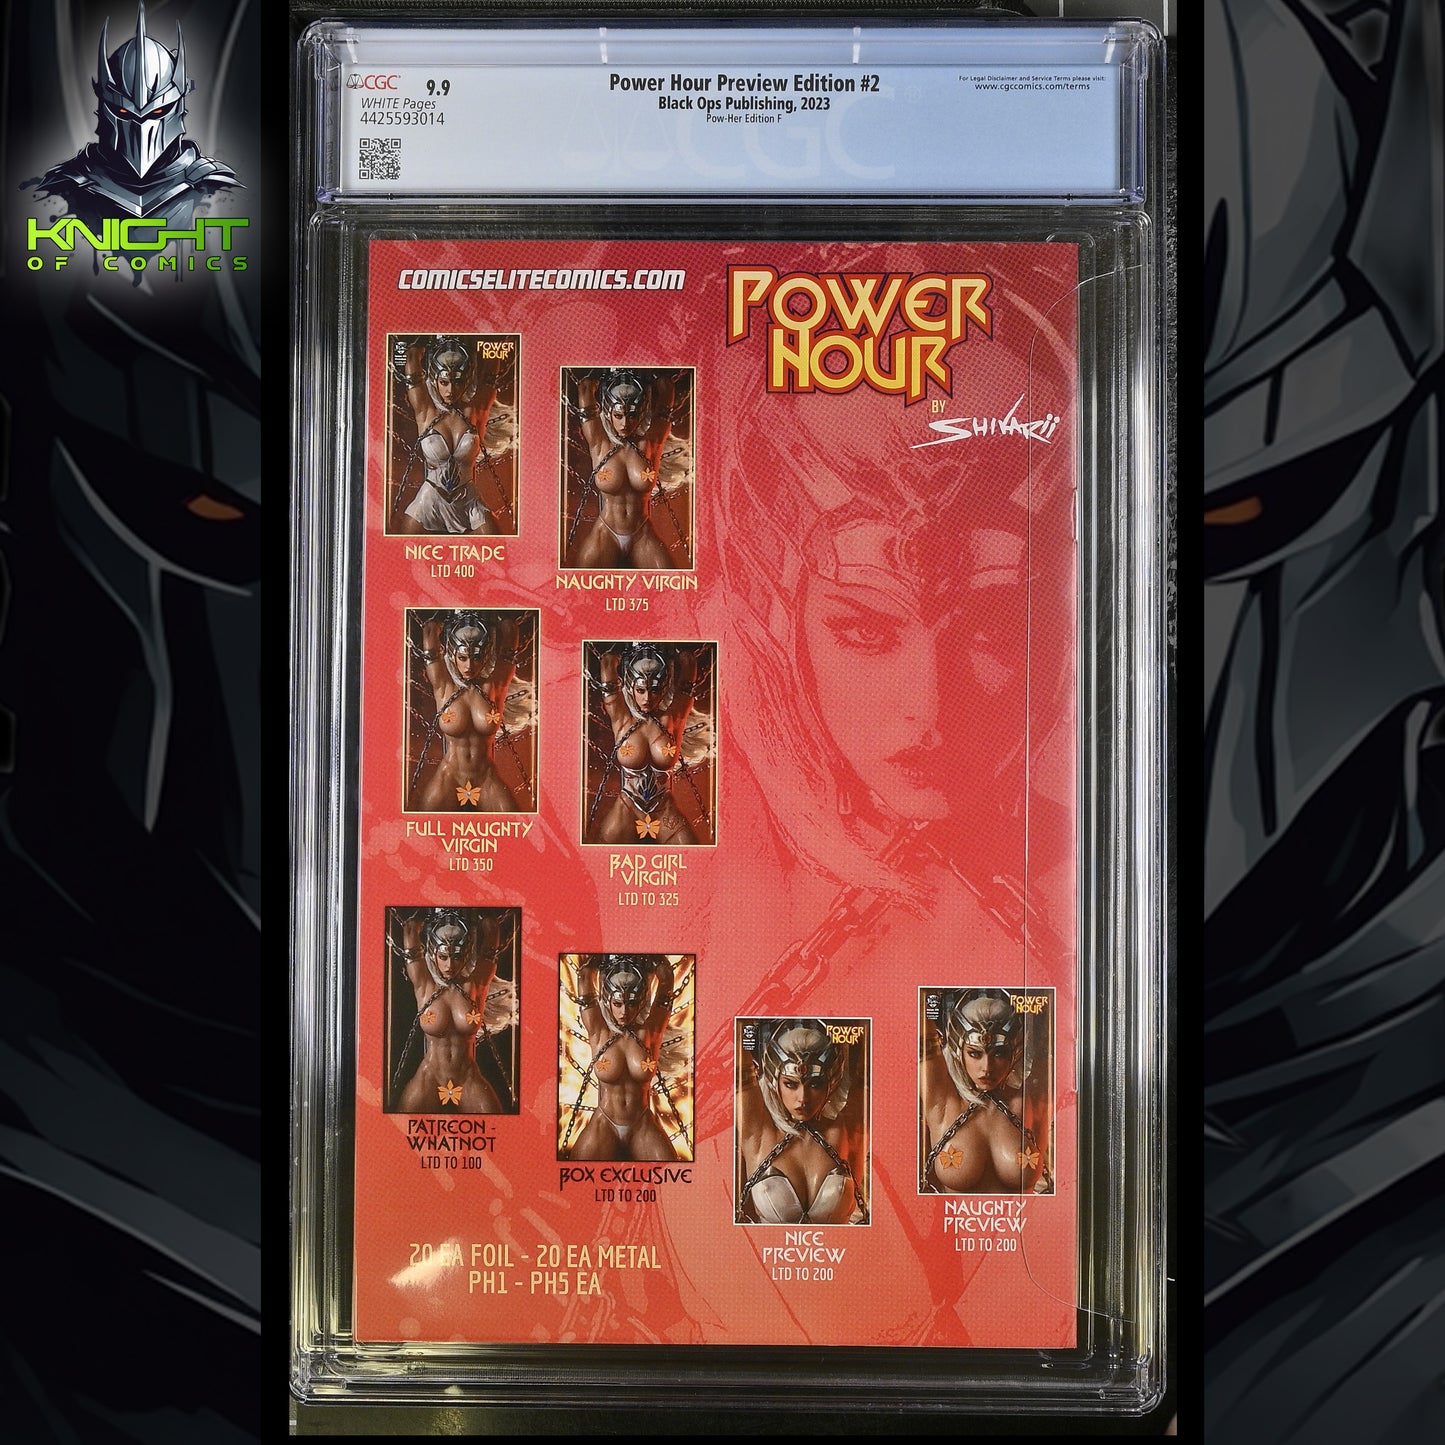 POWER HOUR PREVIEW EDITION #2 SHIKARII VIRGIN VARIANT POW-HER EDITION F CGC 9.9